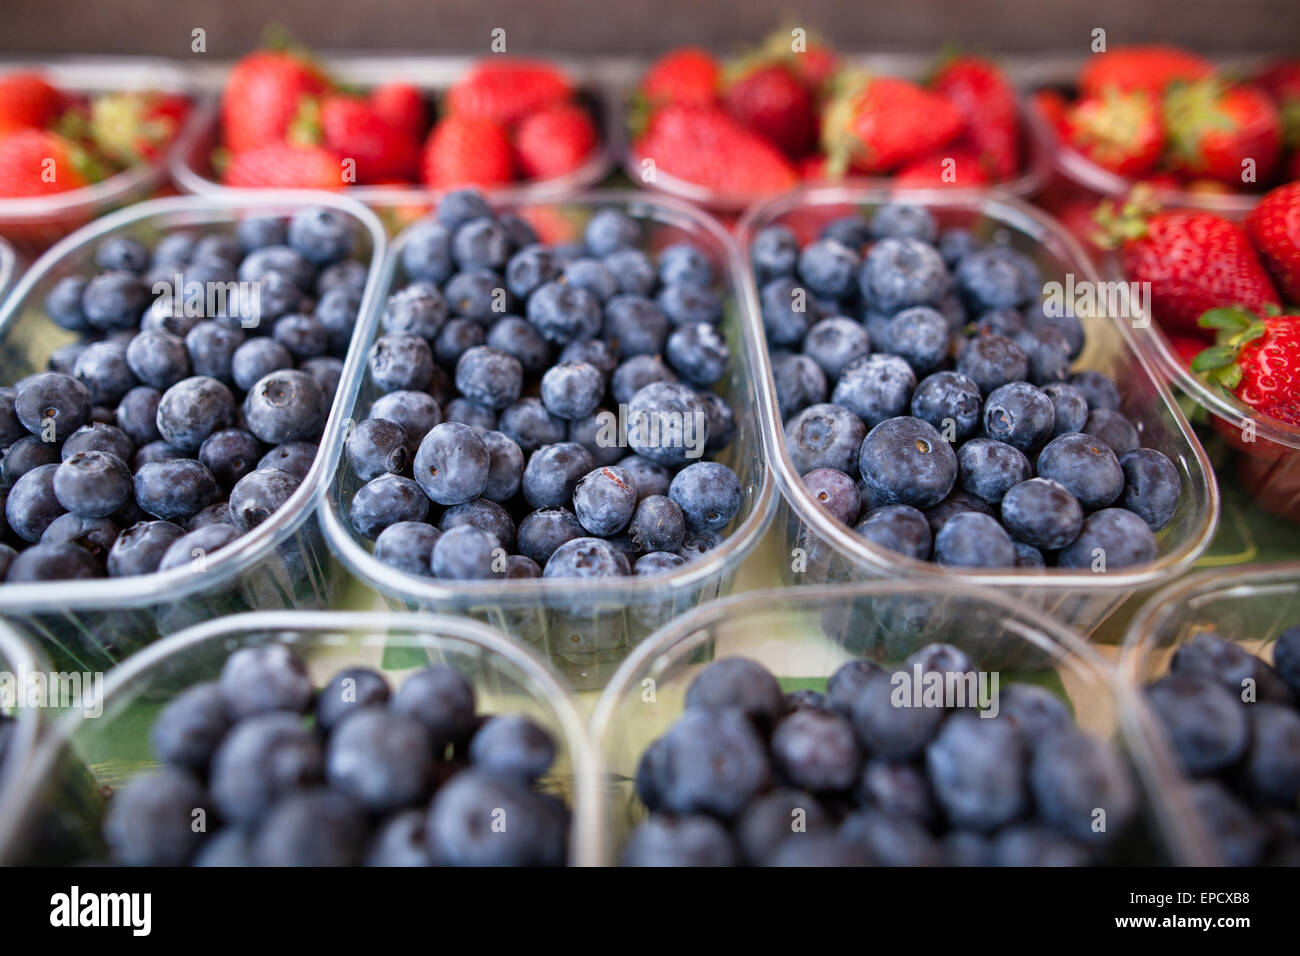 Delicious, ripe and fresh blueberries and strawberries Stock Photo